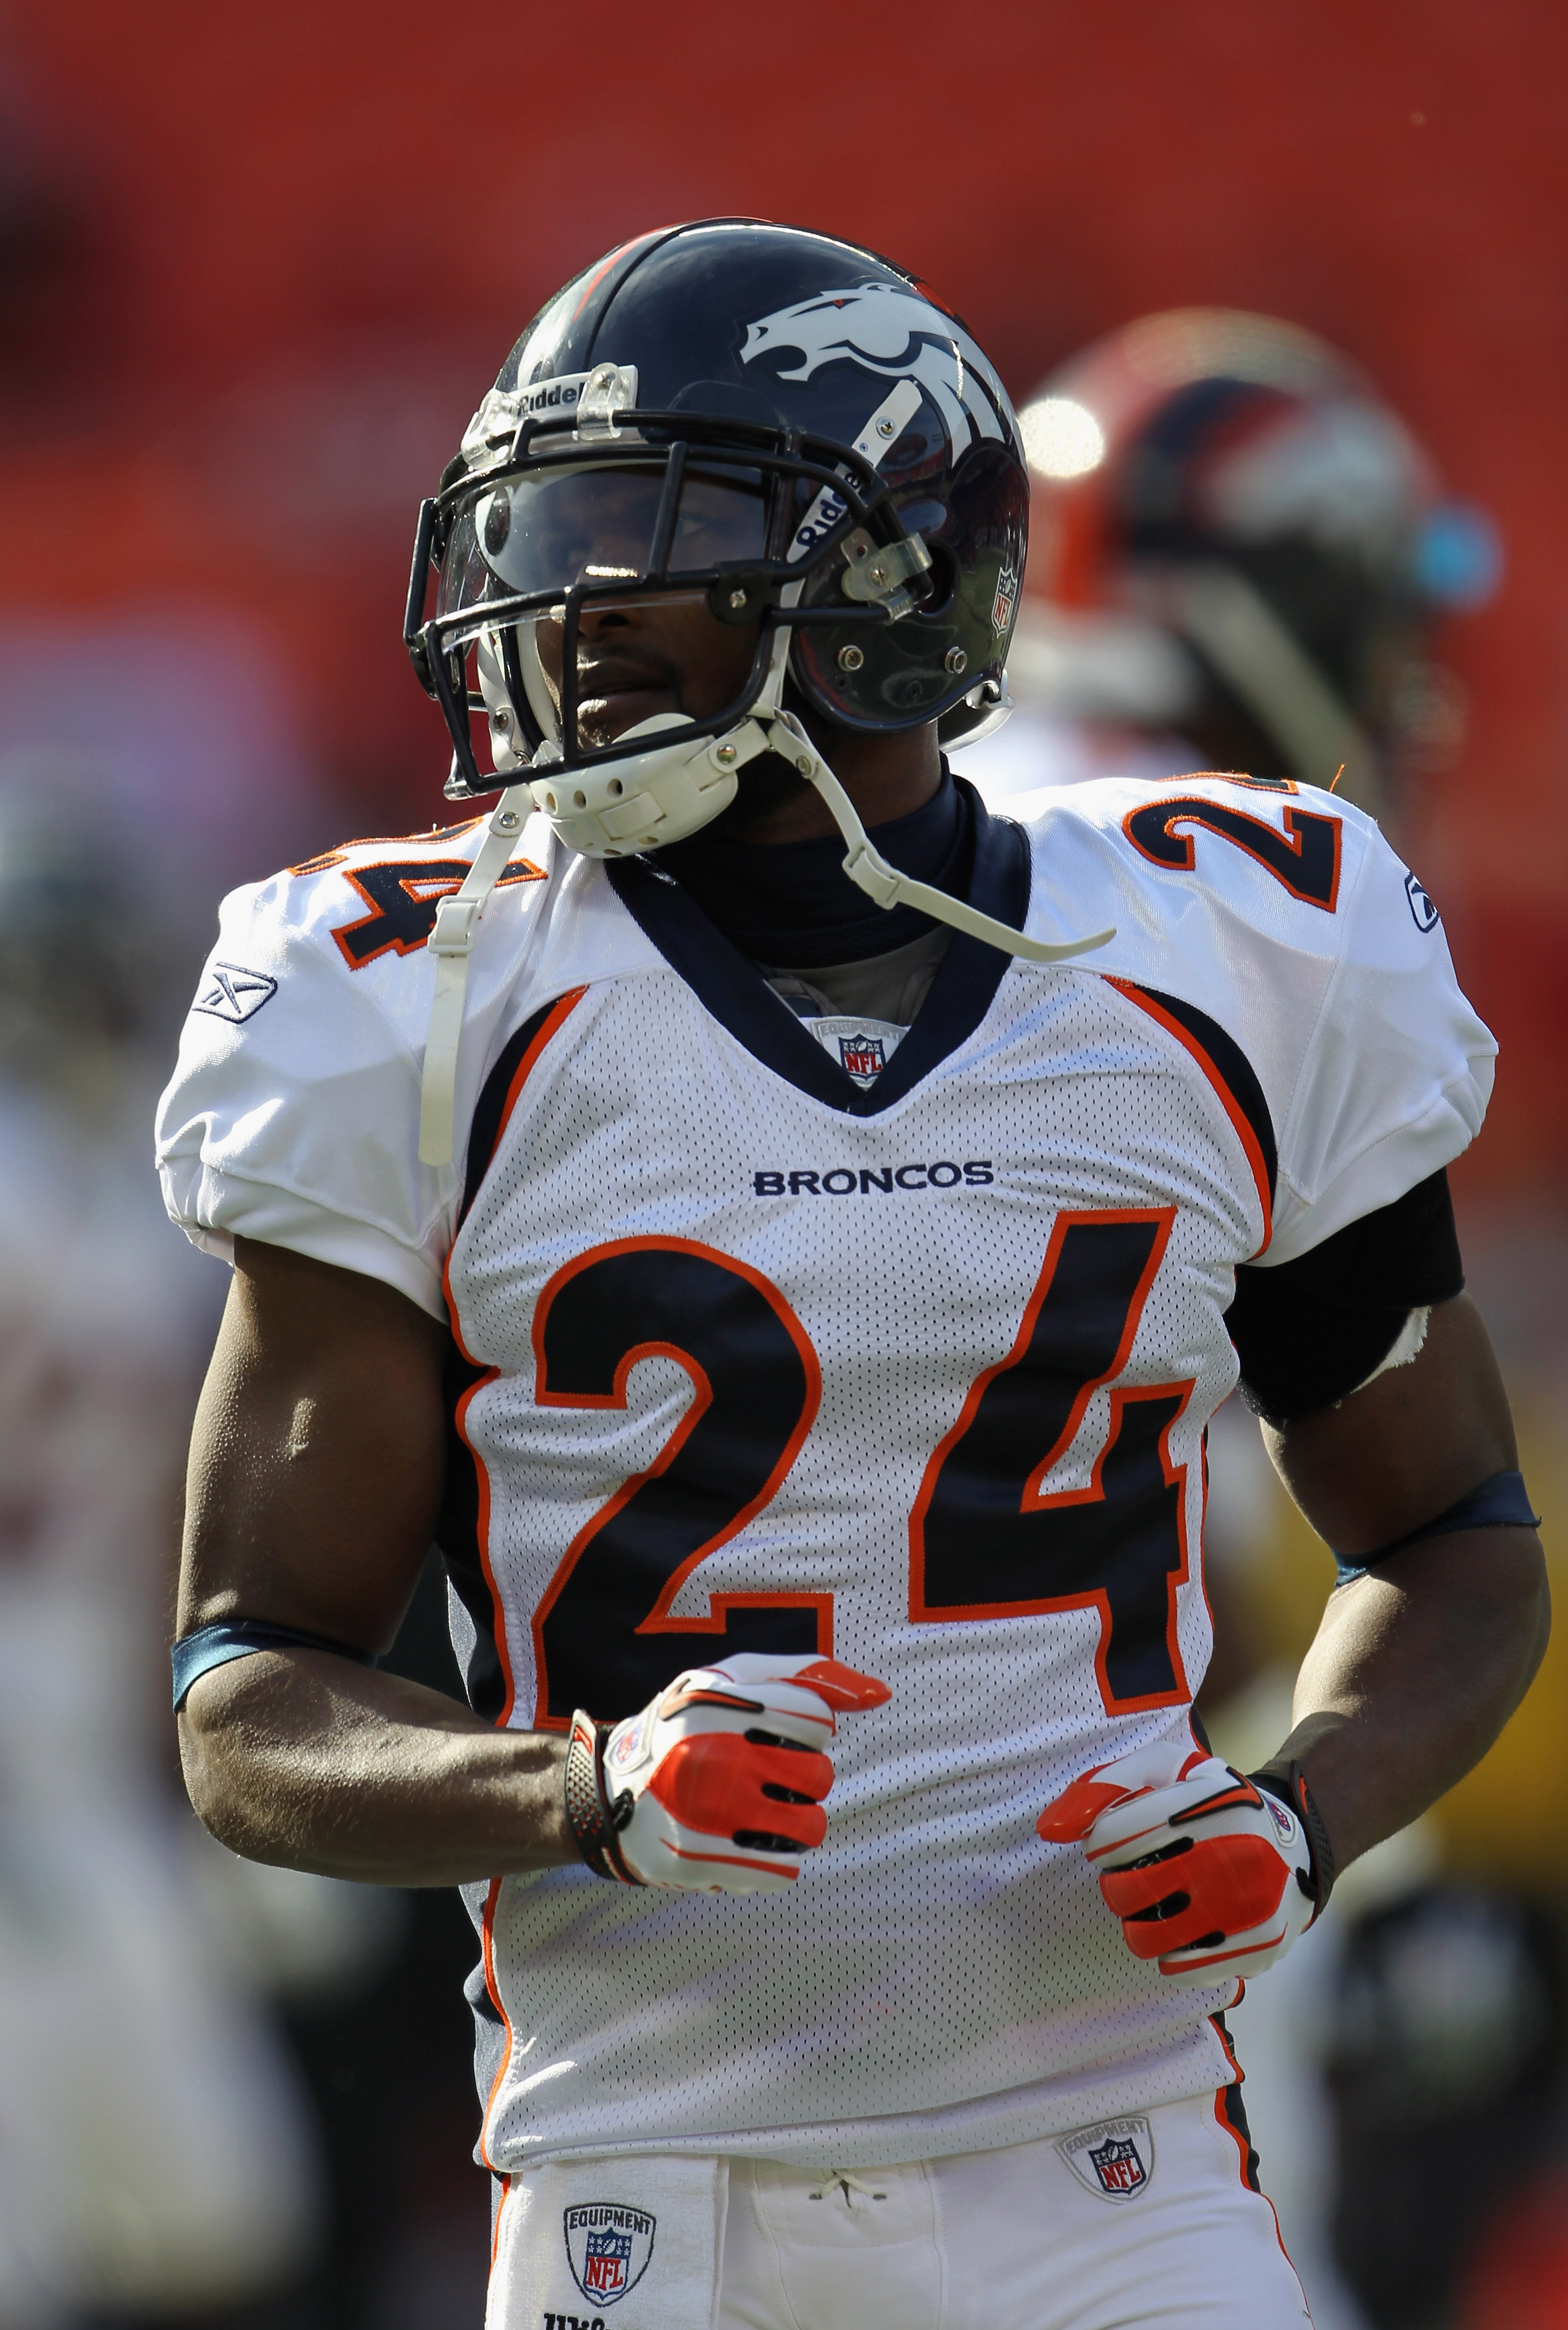 KANSAS CITY, MO - DECEMBER 05:  Champ Bailey #24 of the Denver Broncos during warm-ups prior to the start of the game against the Kansas City Chiefs on December 5, 2010 at Arrowhead Stadium in Kansas City, Missouri.  (Photo by Jamie Squire/Getty Images)